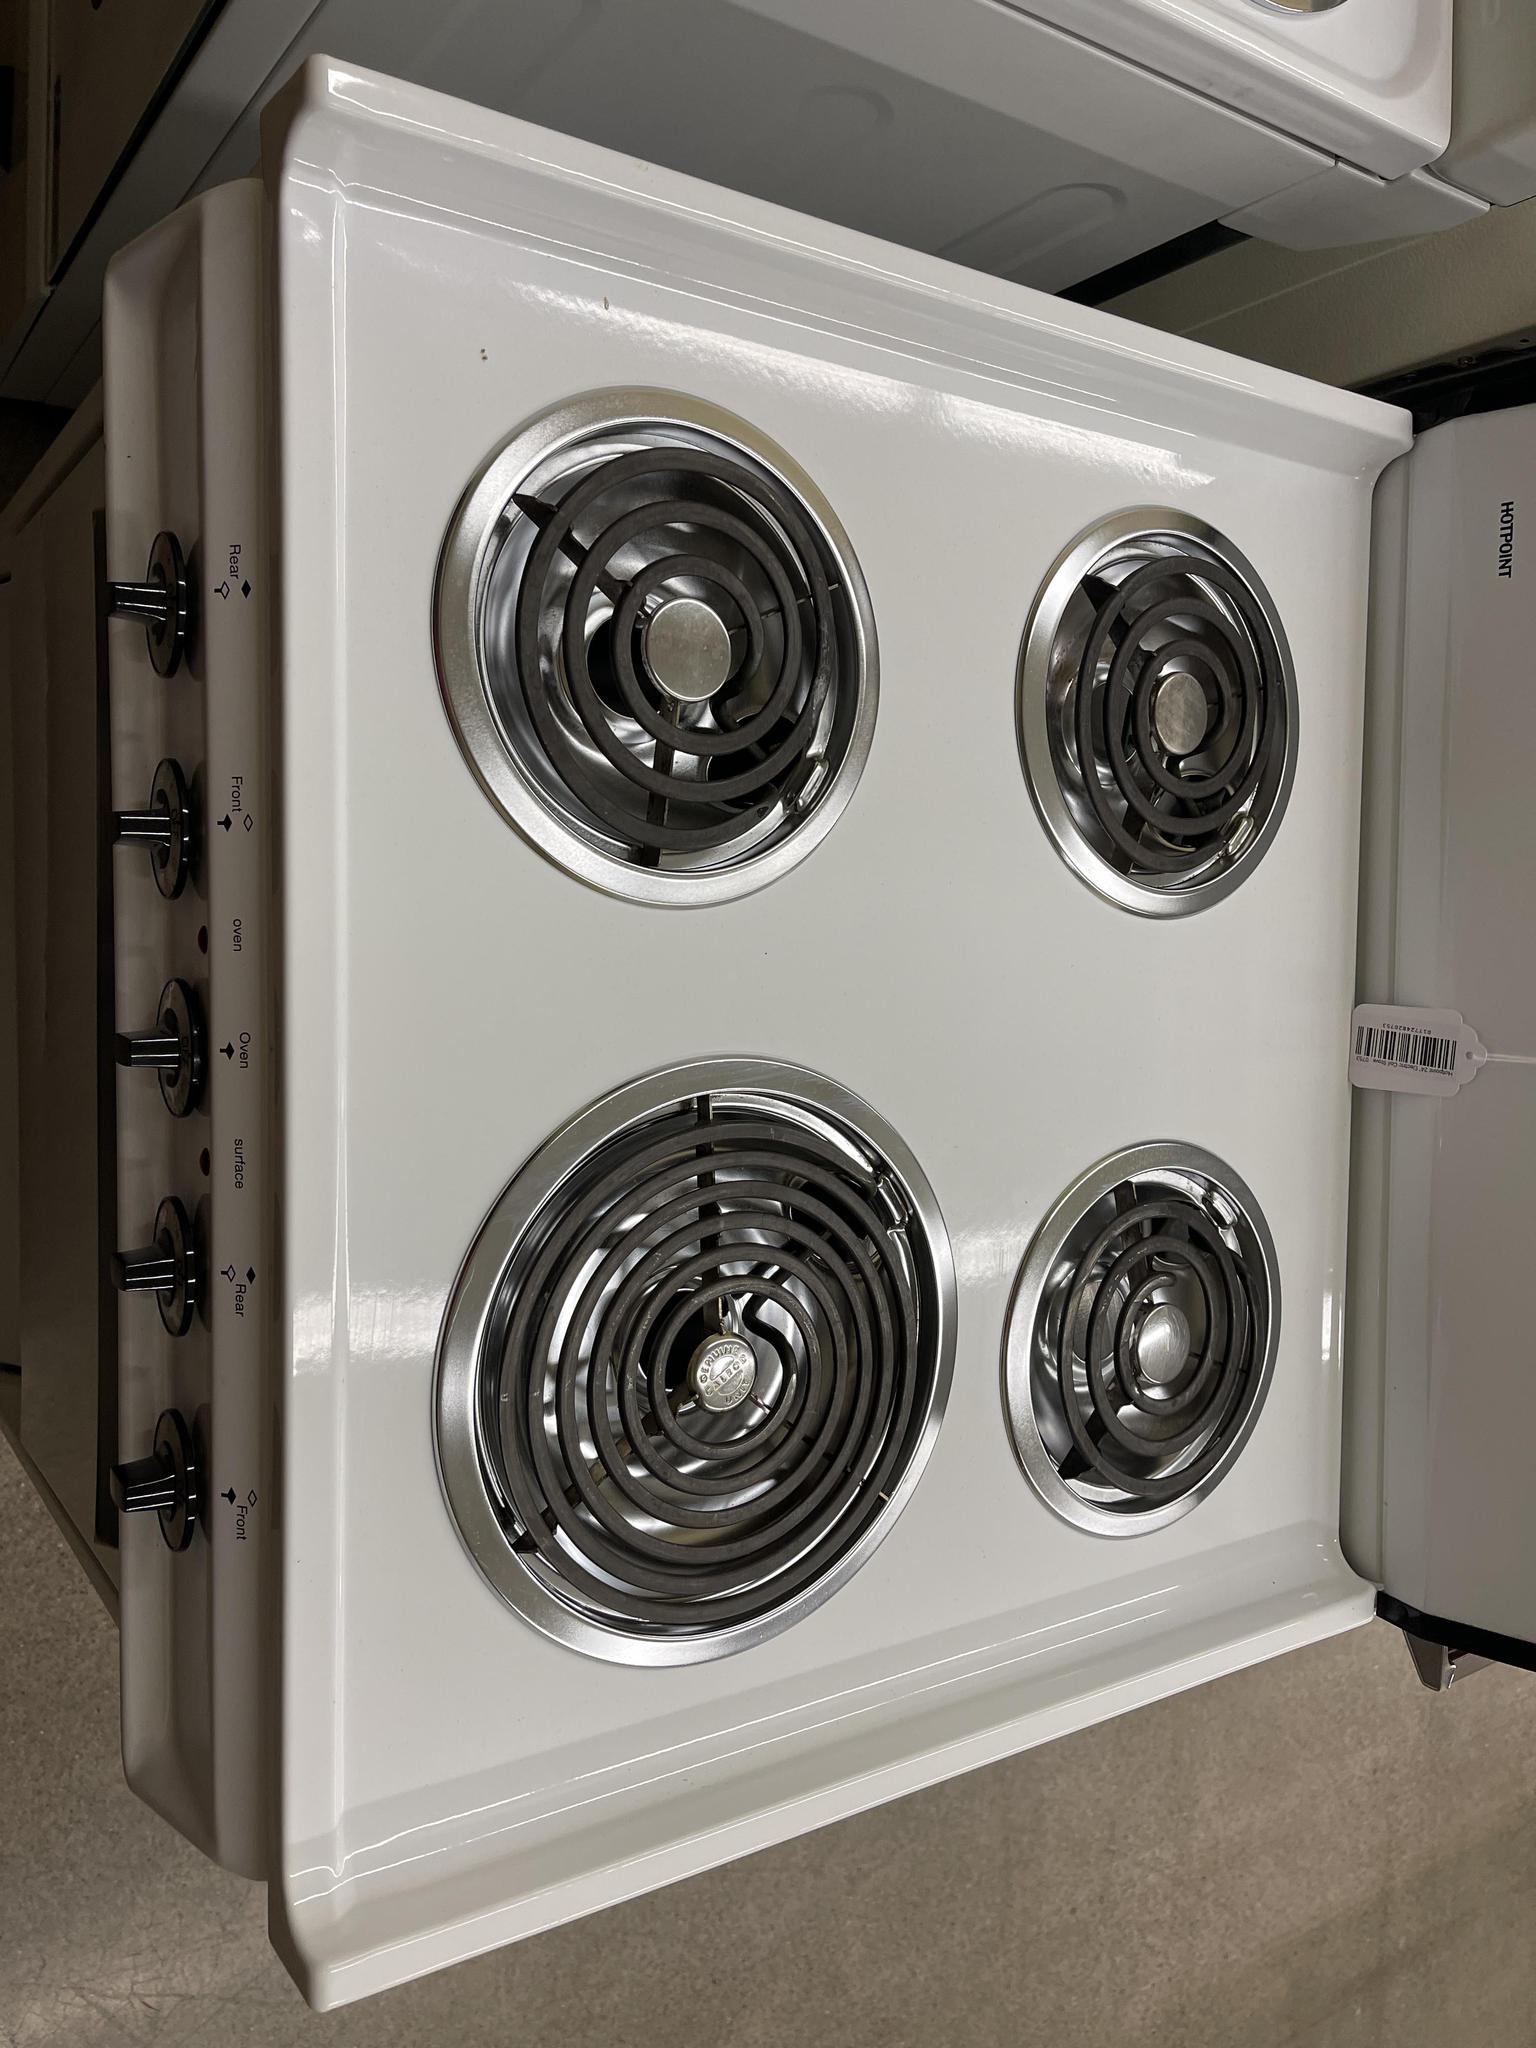 Hotpoint Electric 24 inch mini stove 240 volts for Sale in San Diego